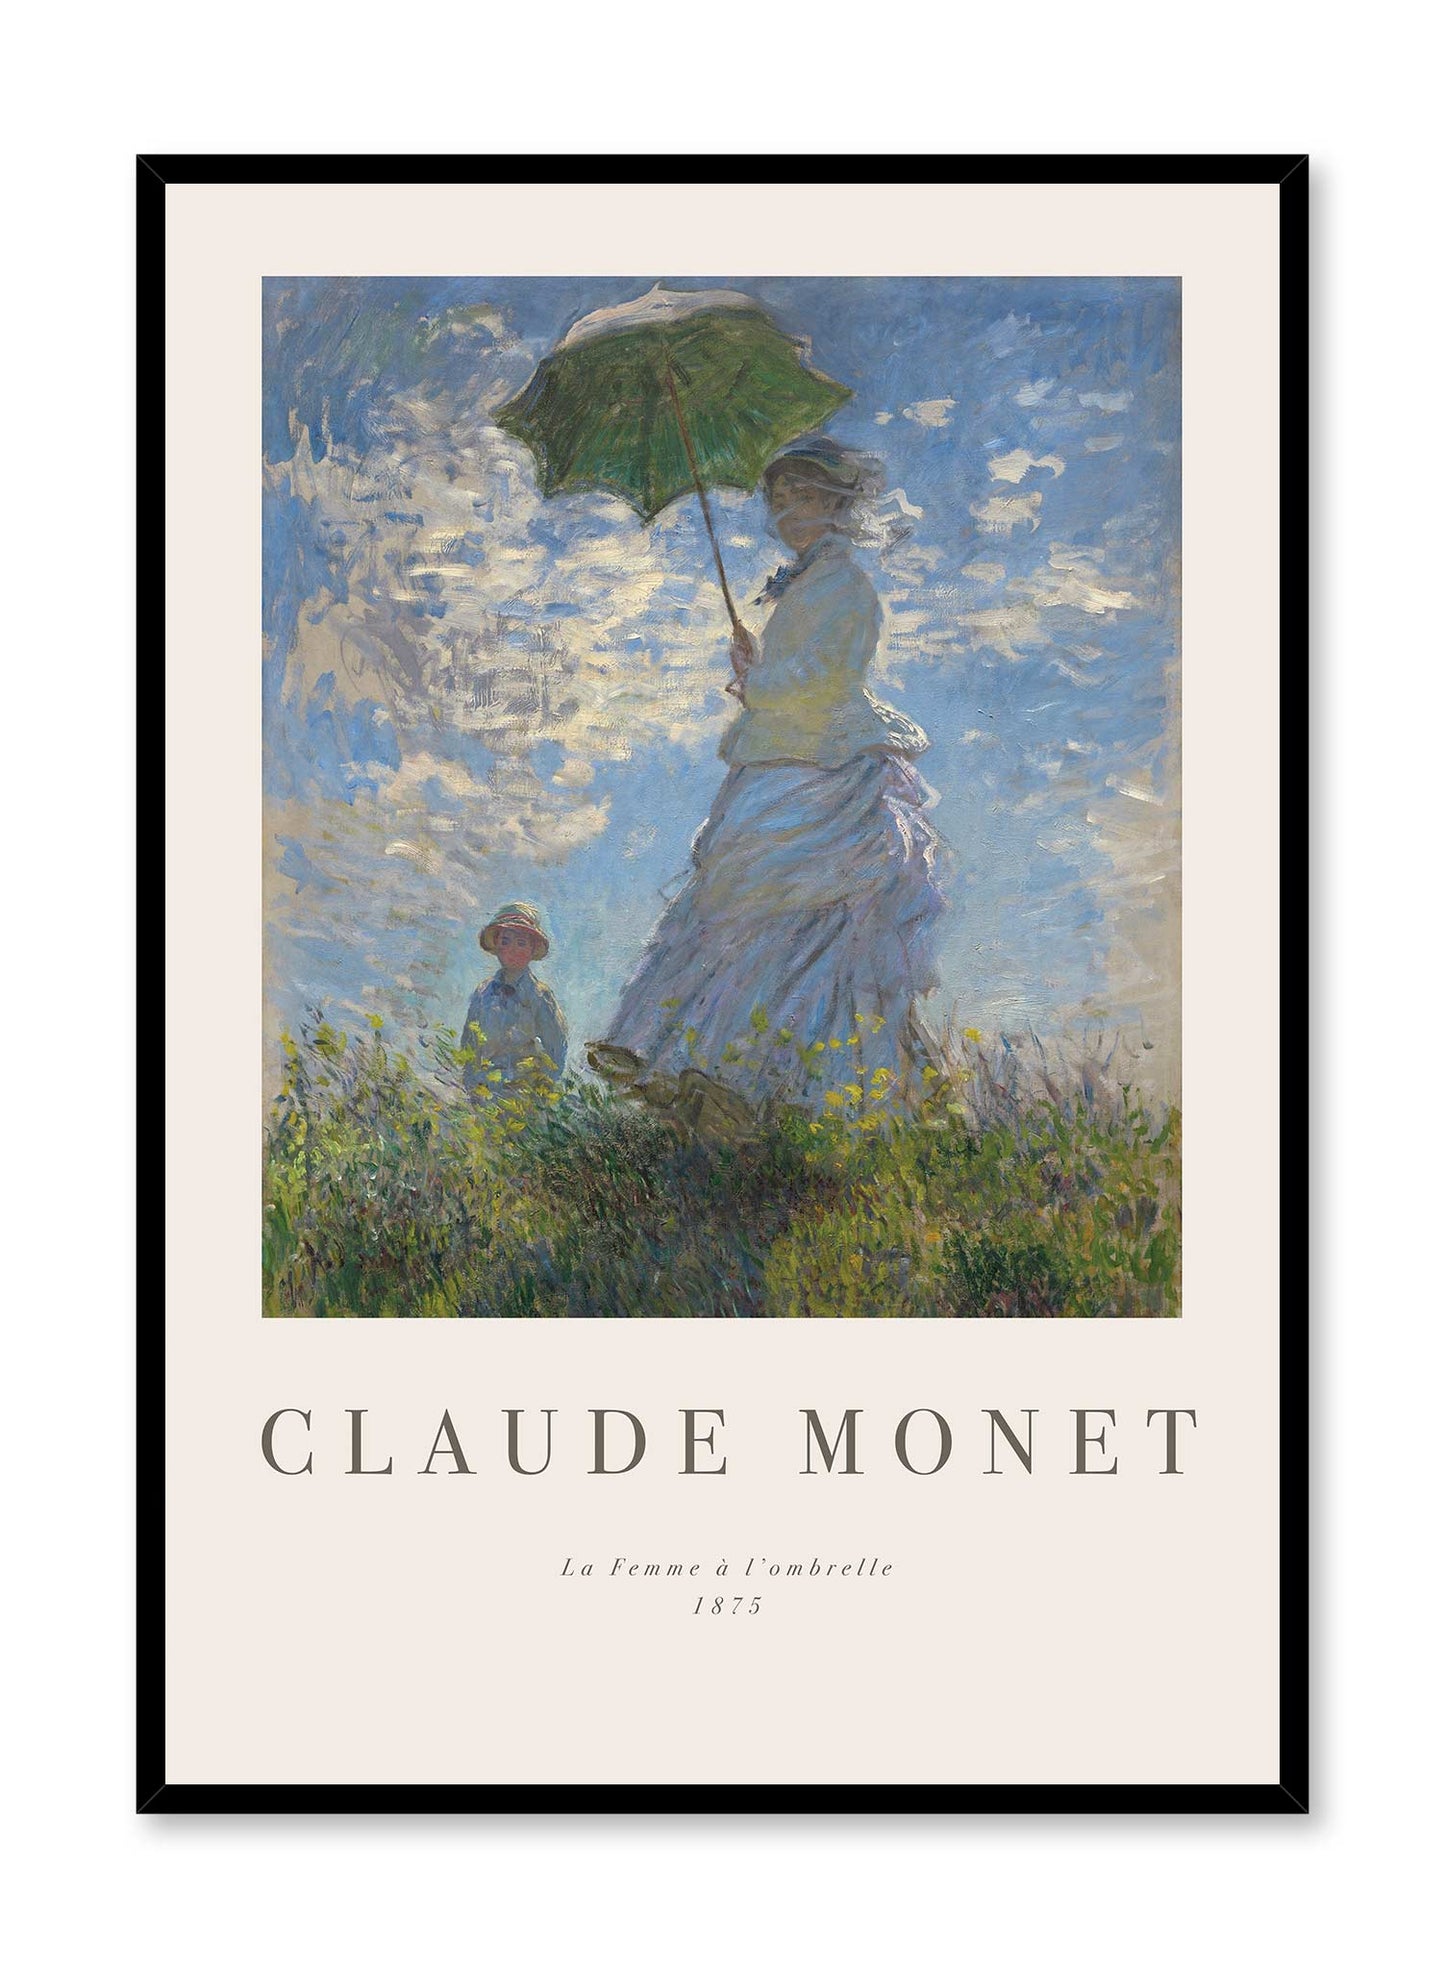 Woman with a Parasol is a minimalist artwork by Opposite Wall of Claude Monet's La Femme à l’ombrelle from 1875.